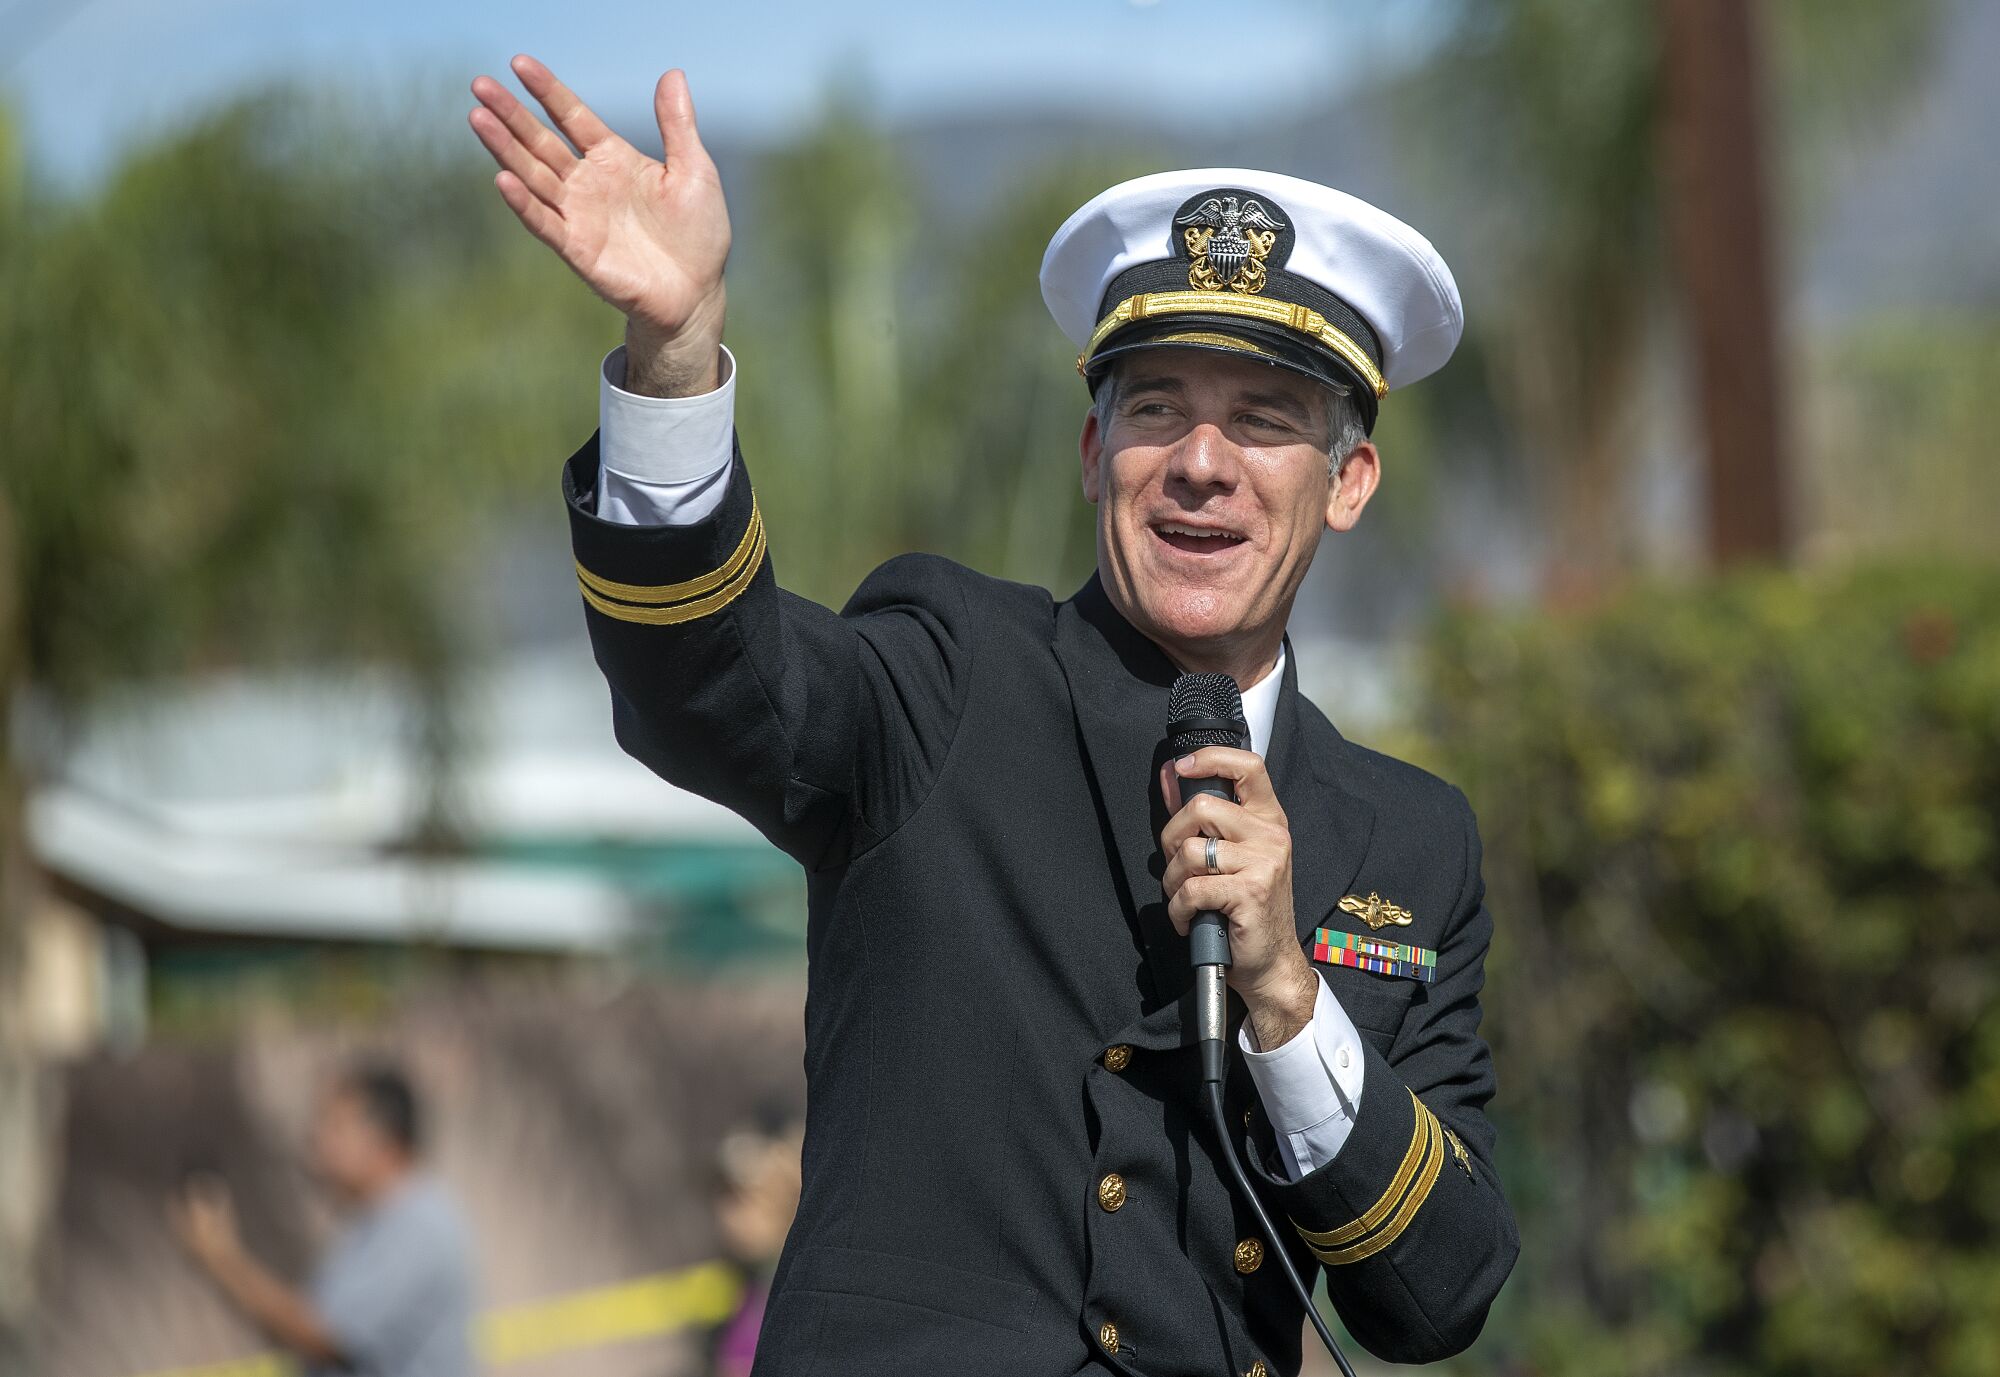 Los Angeles Mayor Eric Garcetti, in uniform, holds a microphone and waves 